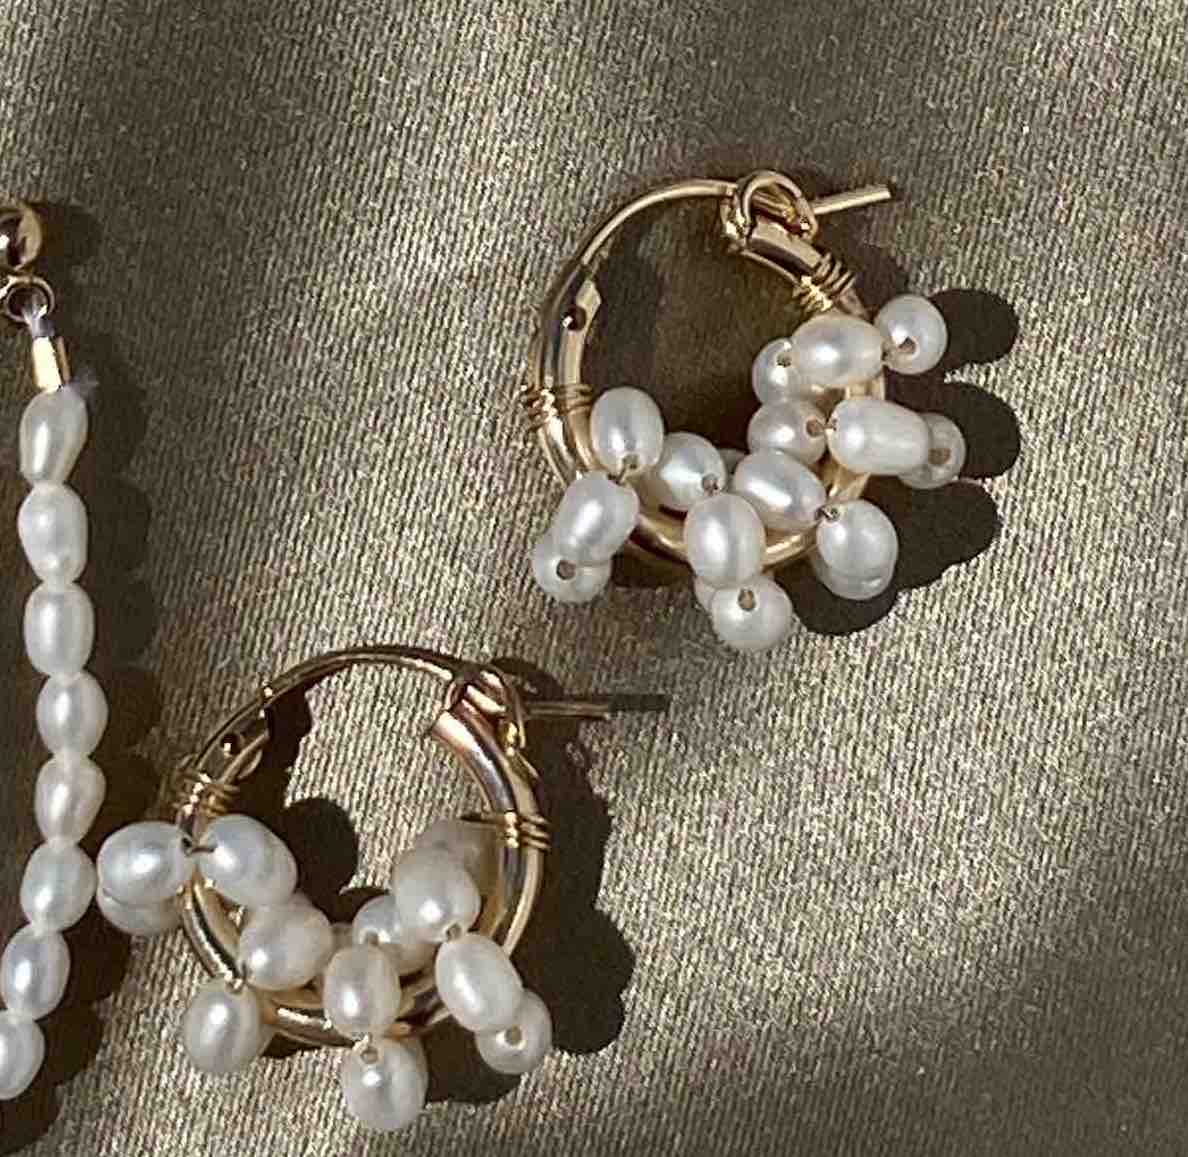 Areese Hoop Earrings by KOZAKH. 15mm hoop earrings with snap closure, crafted in 14K Gold Filled and embellished with 5mm white Rice Pearls.